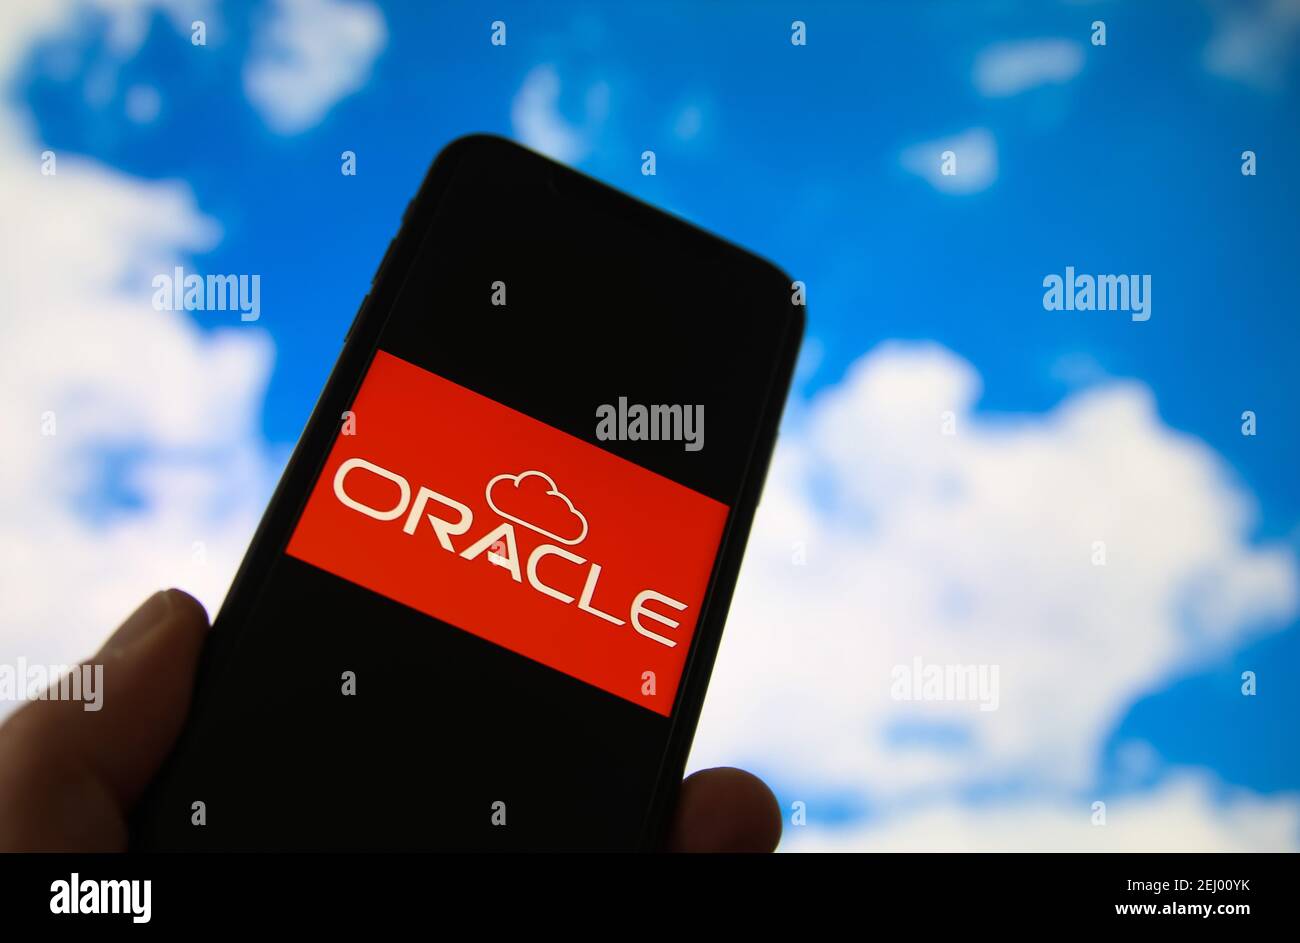 Viersen, Germany - February 9. 2021: Closeup of smartphone with logo lettering of cloud computing provider service oracle, blurred sky and cloud backg Stock Photo